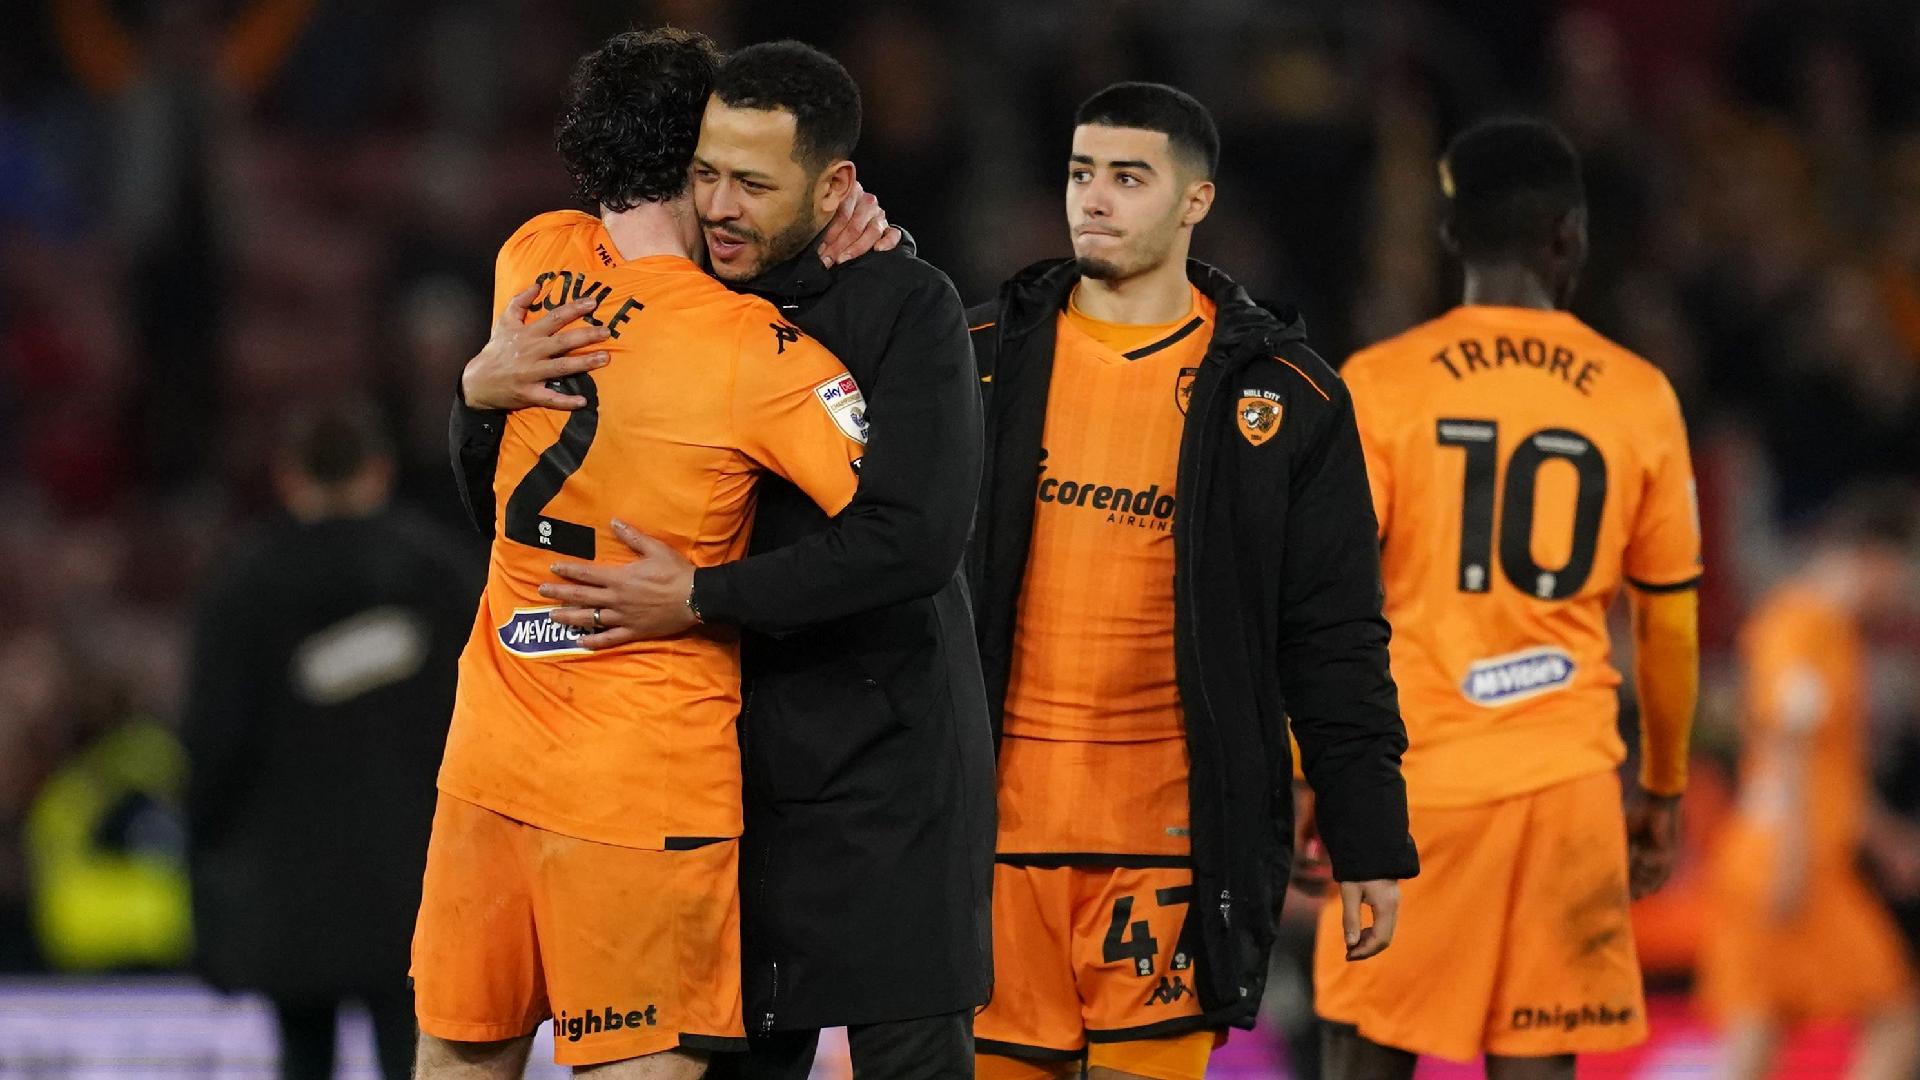 Win at Southampton was exactly what we’ve worked for – Liam Rosenior